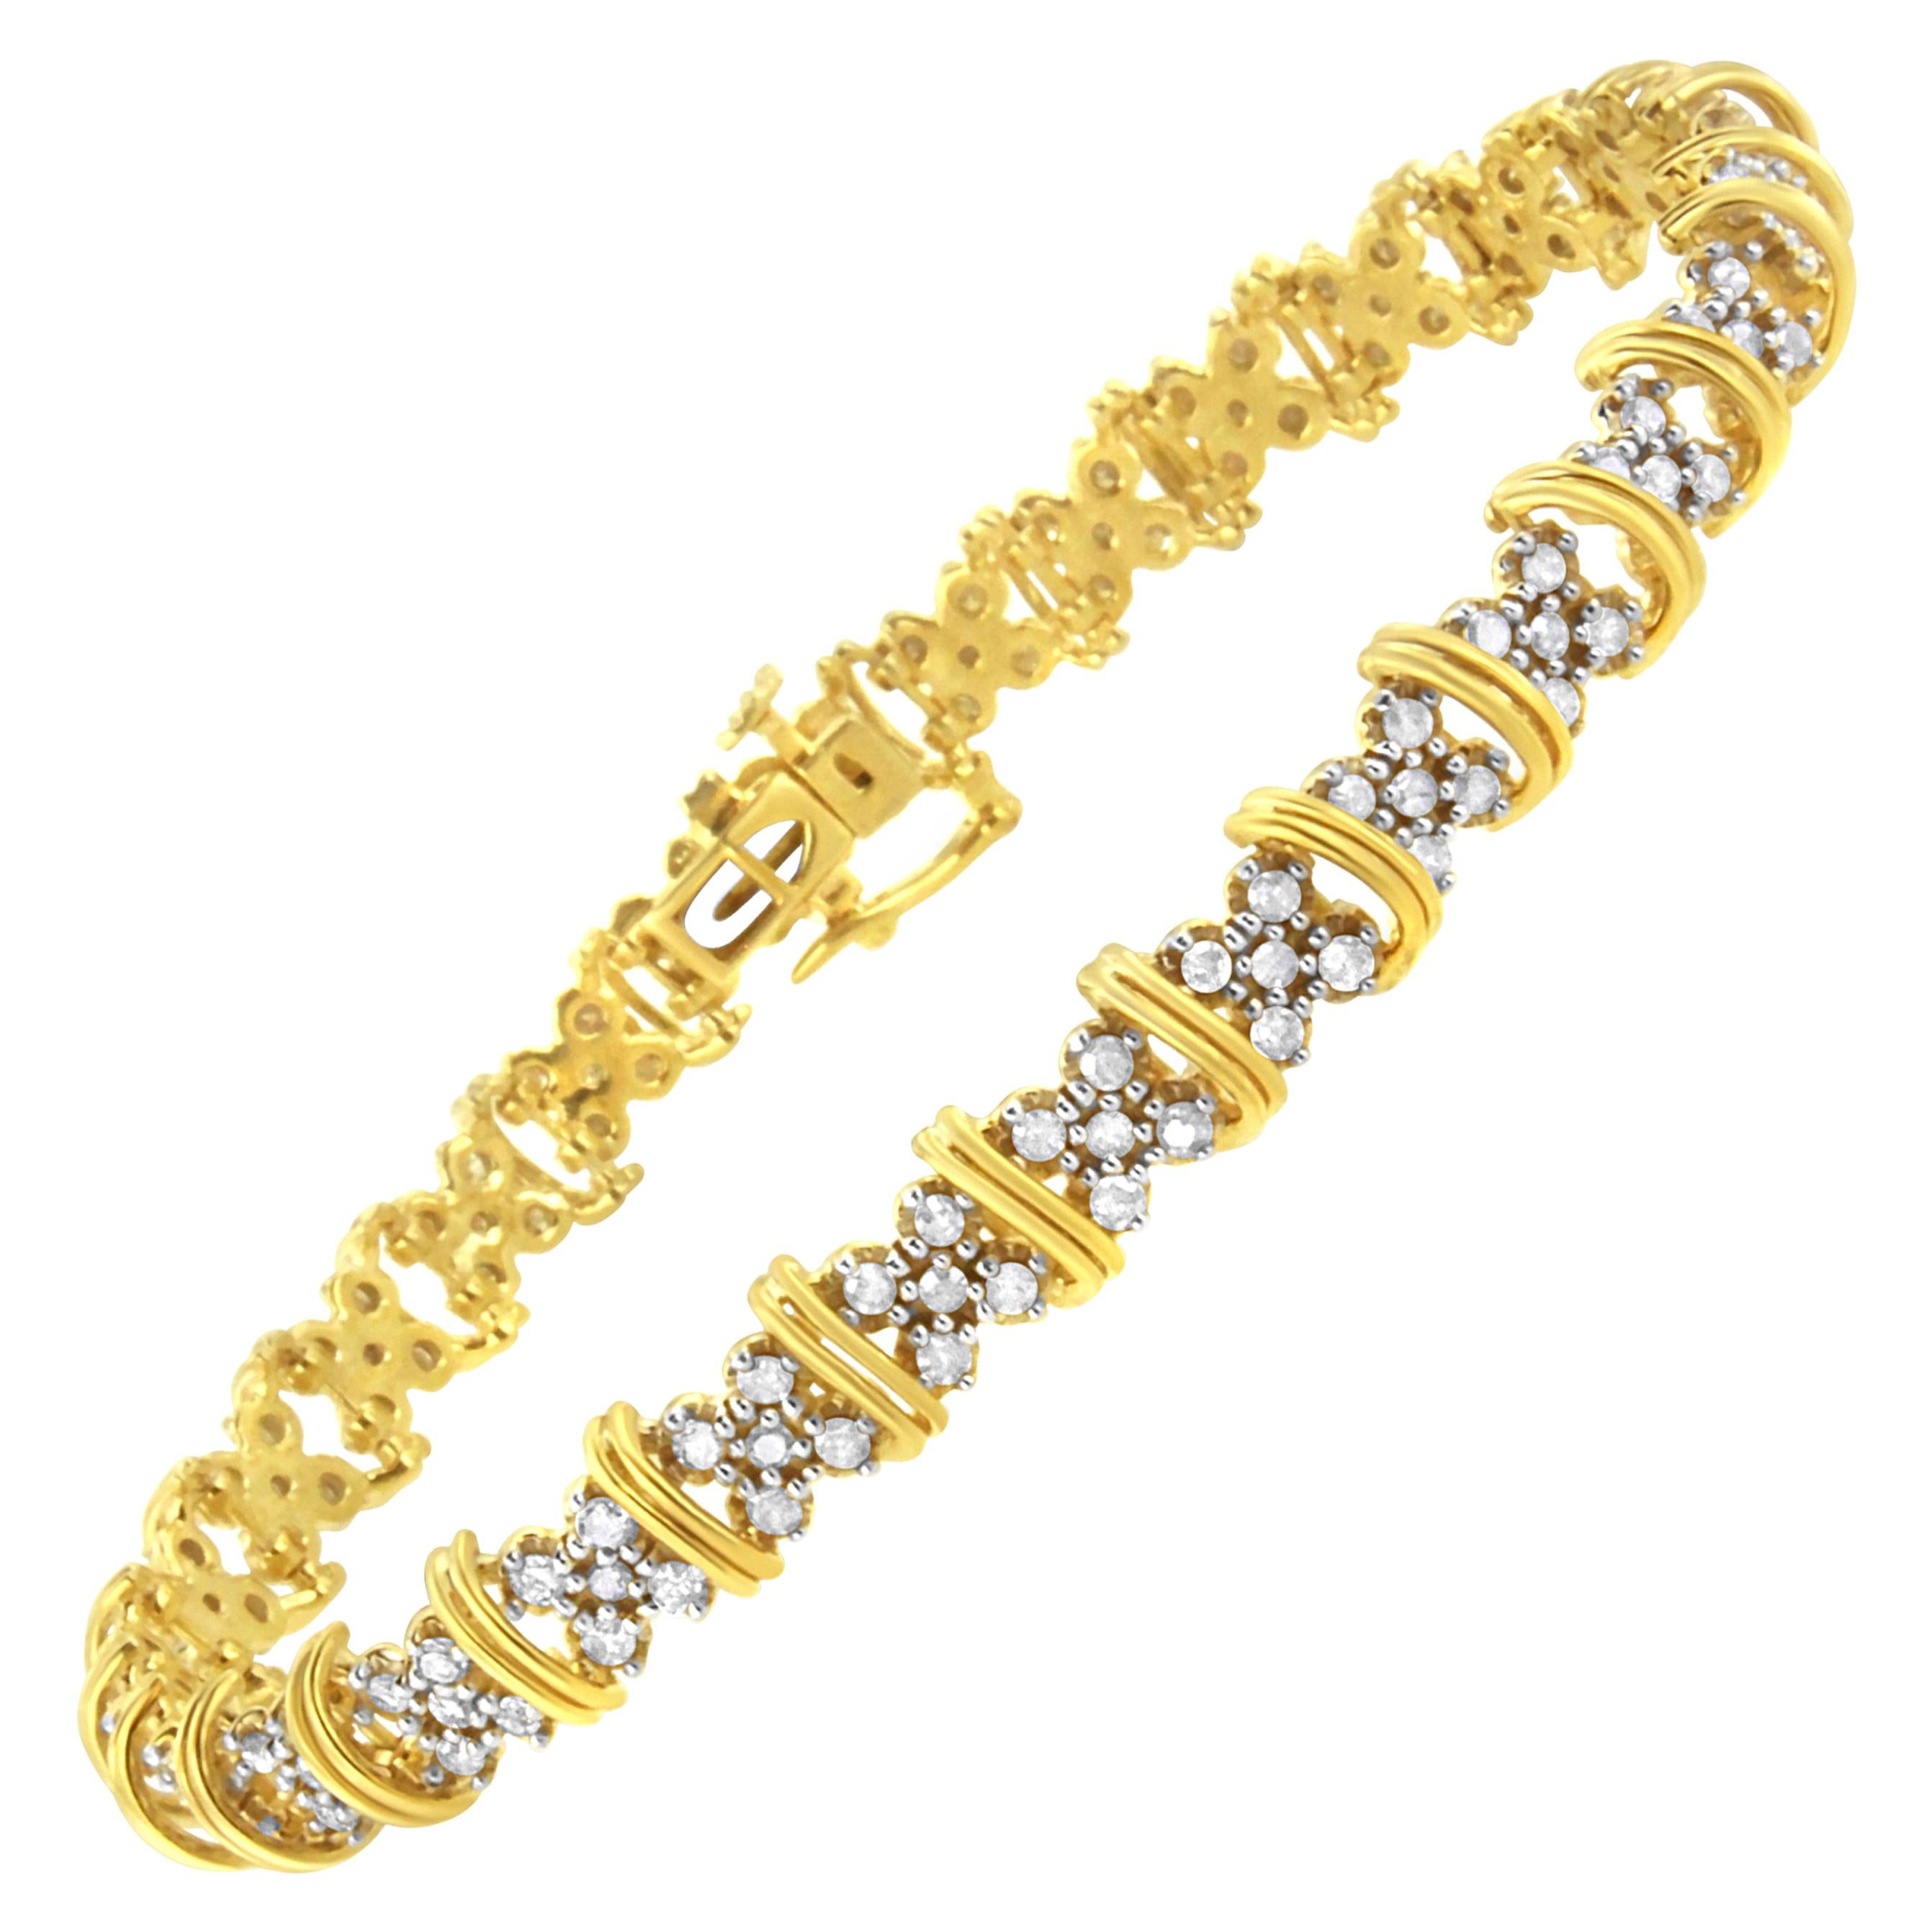 Yellow Gold Plated Sterling Silver 2.0 Carat Diamond "X" Shape Link Bracelet For Sale